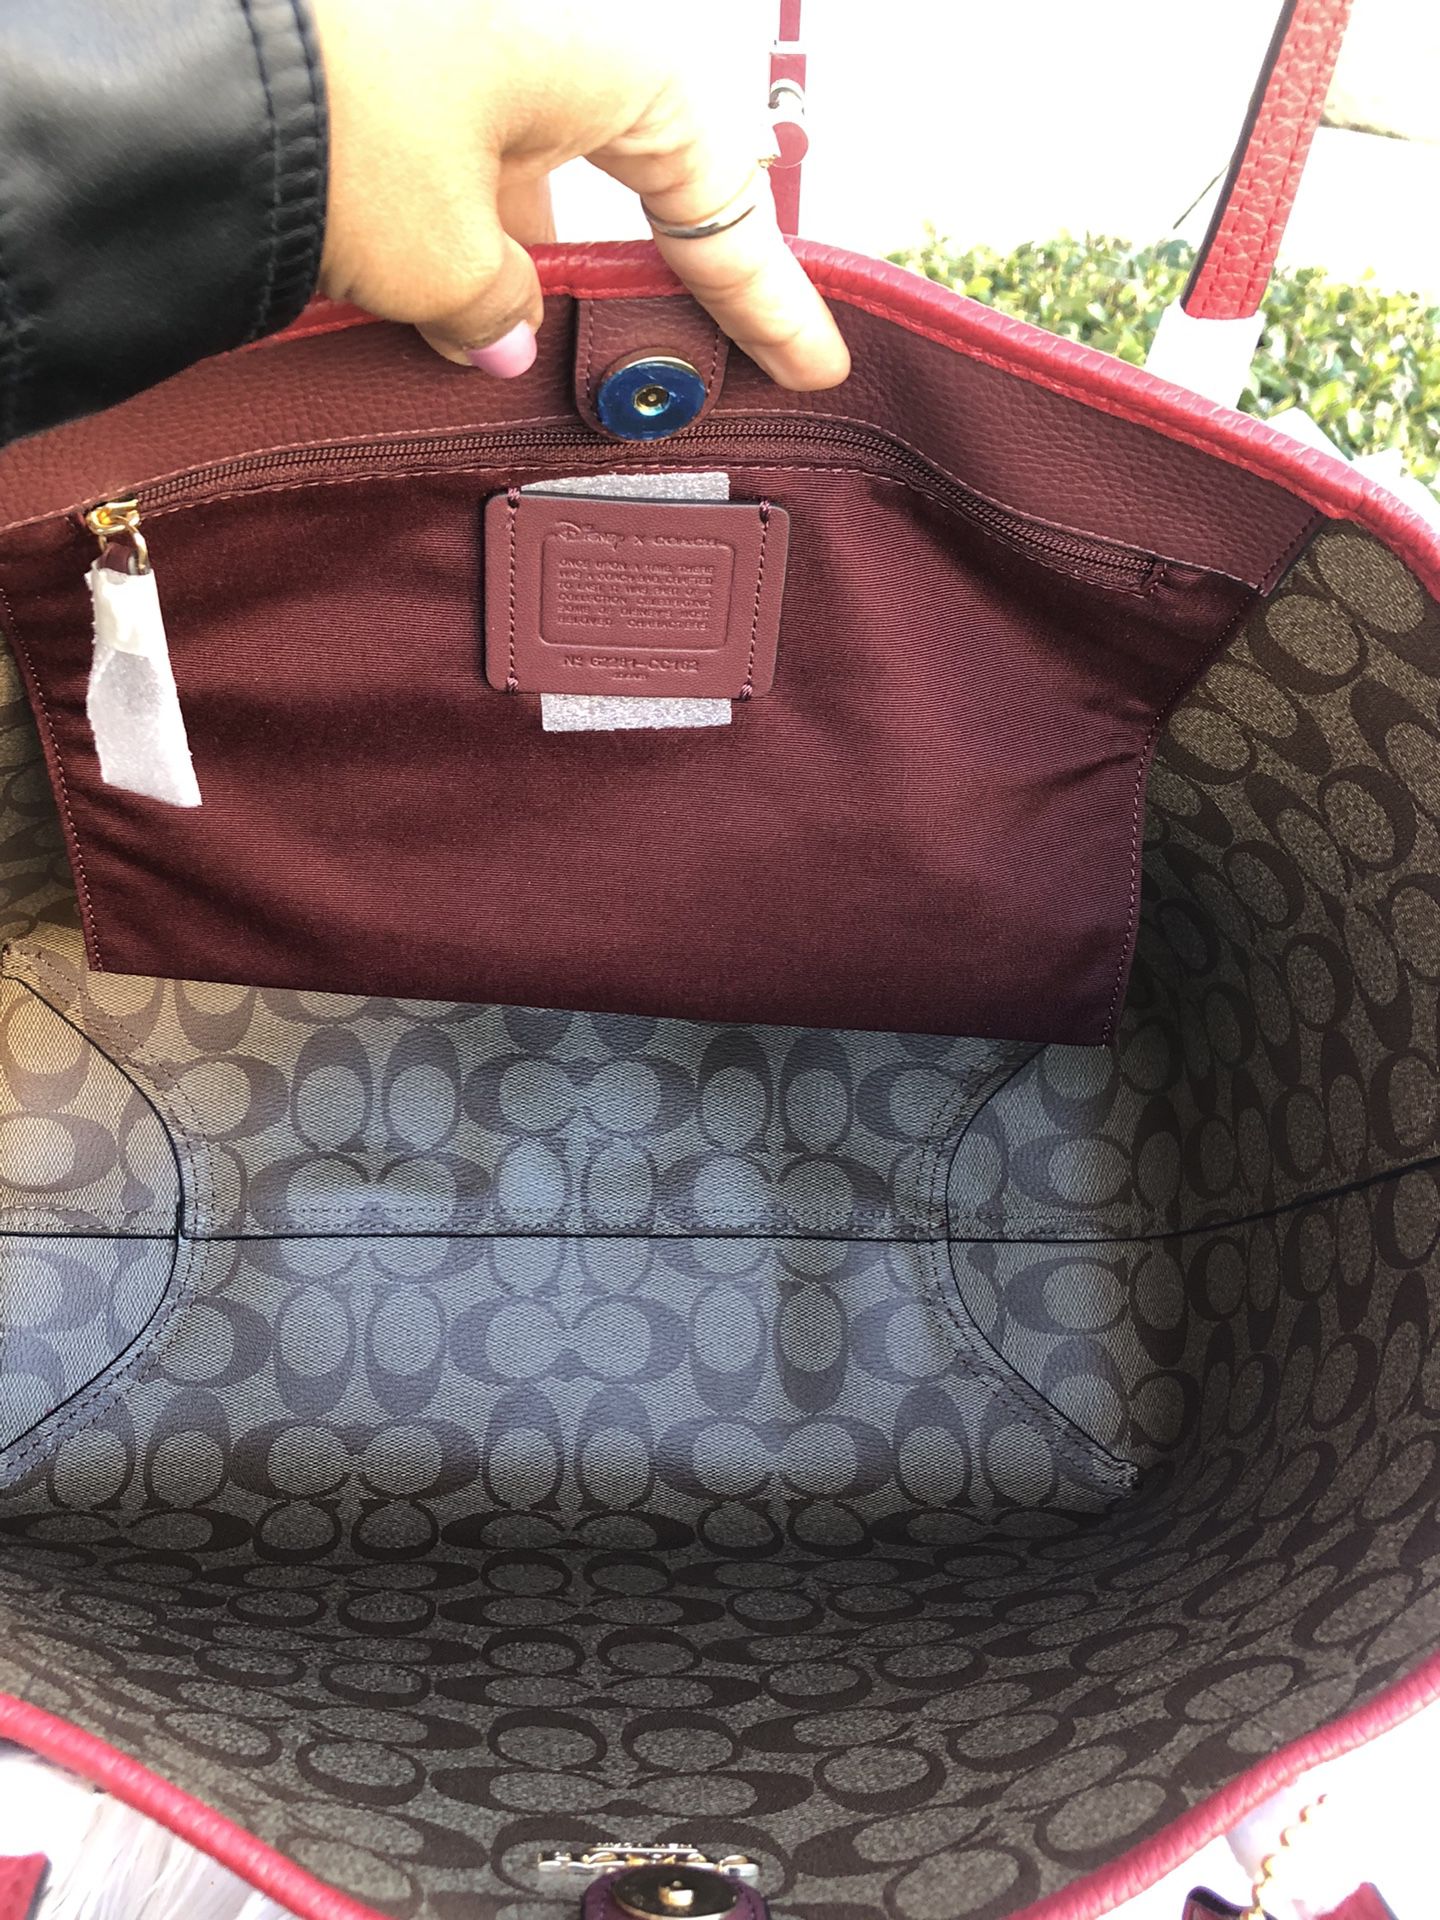 Disney Villains Coach Crossbody for Sale in Tacoma, WA - OfferUp